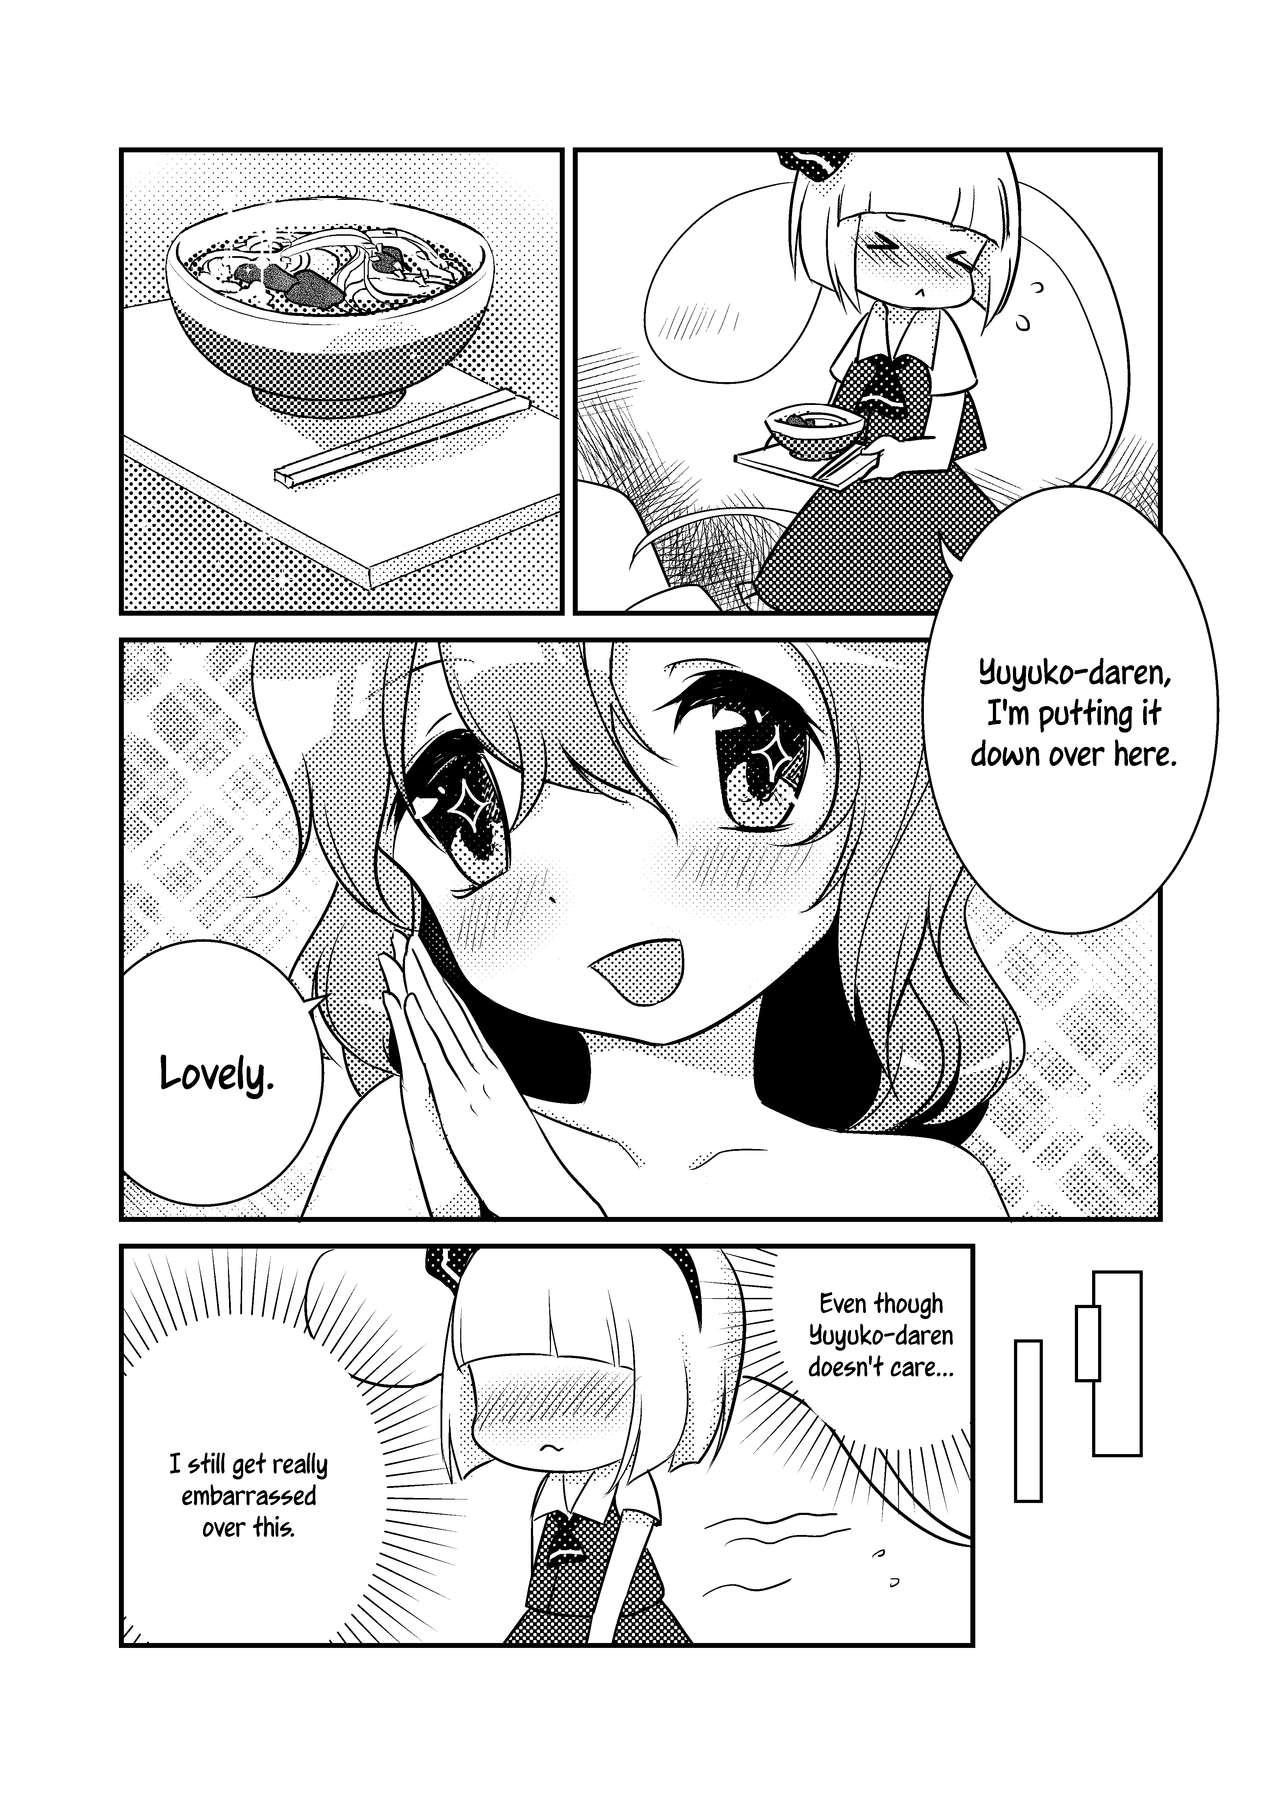 Oiled ????一起泡温泉吧！ | ????Let's Soak in the Hot Spring! - Touhou project Putaria - Page 4